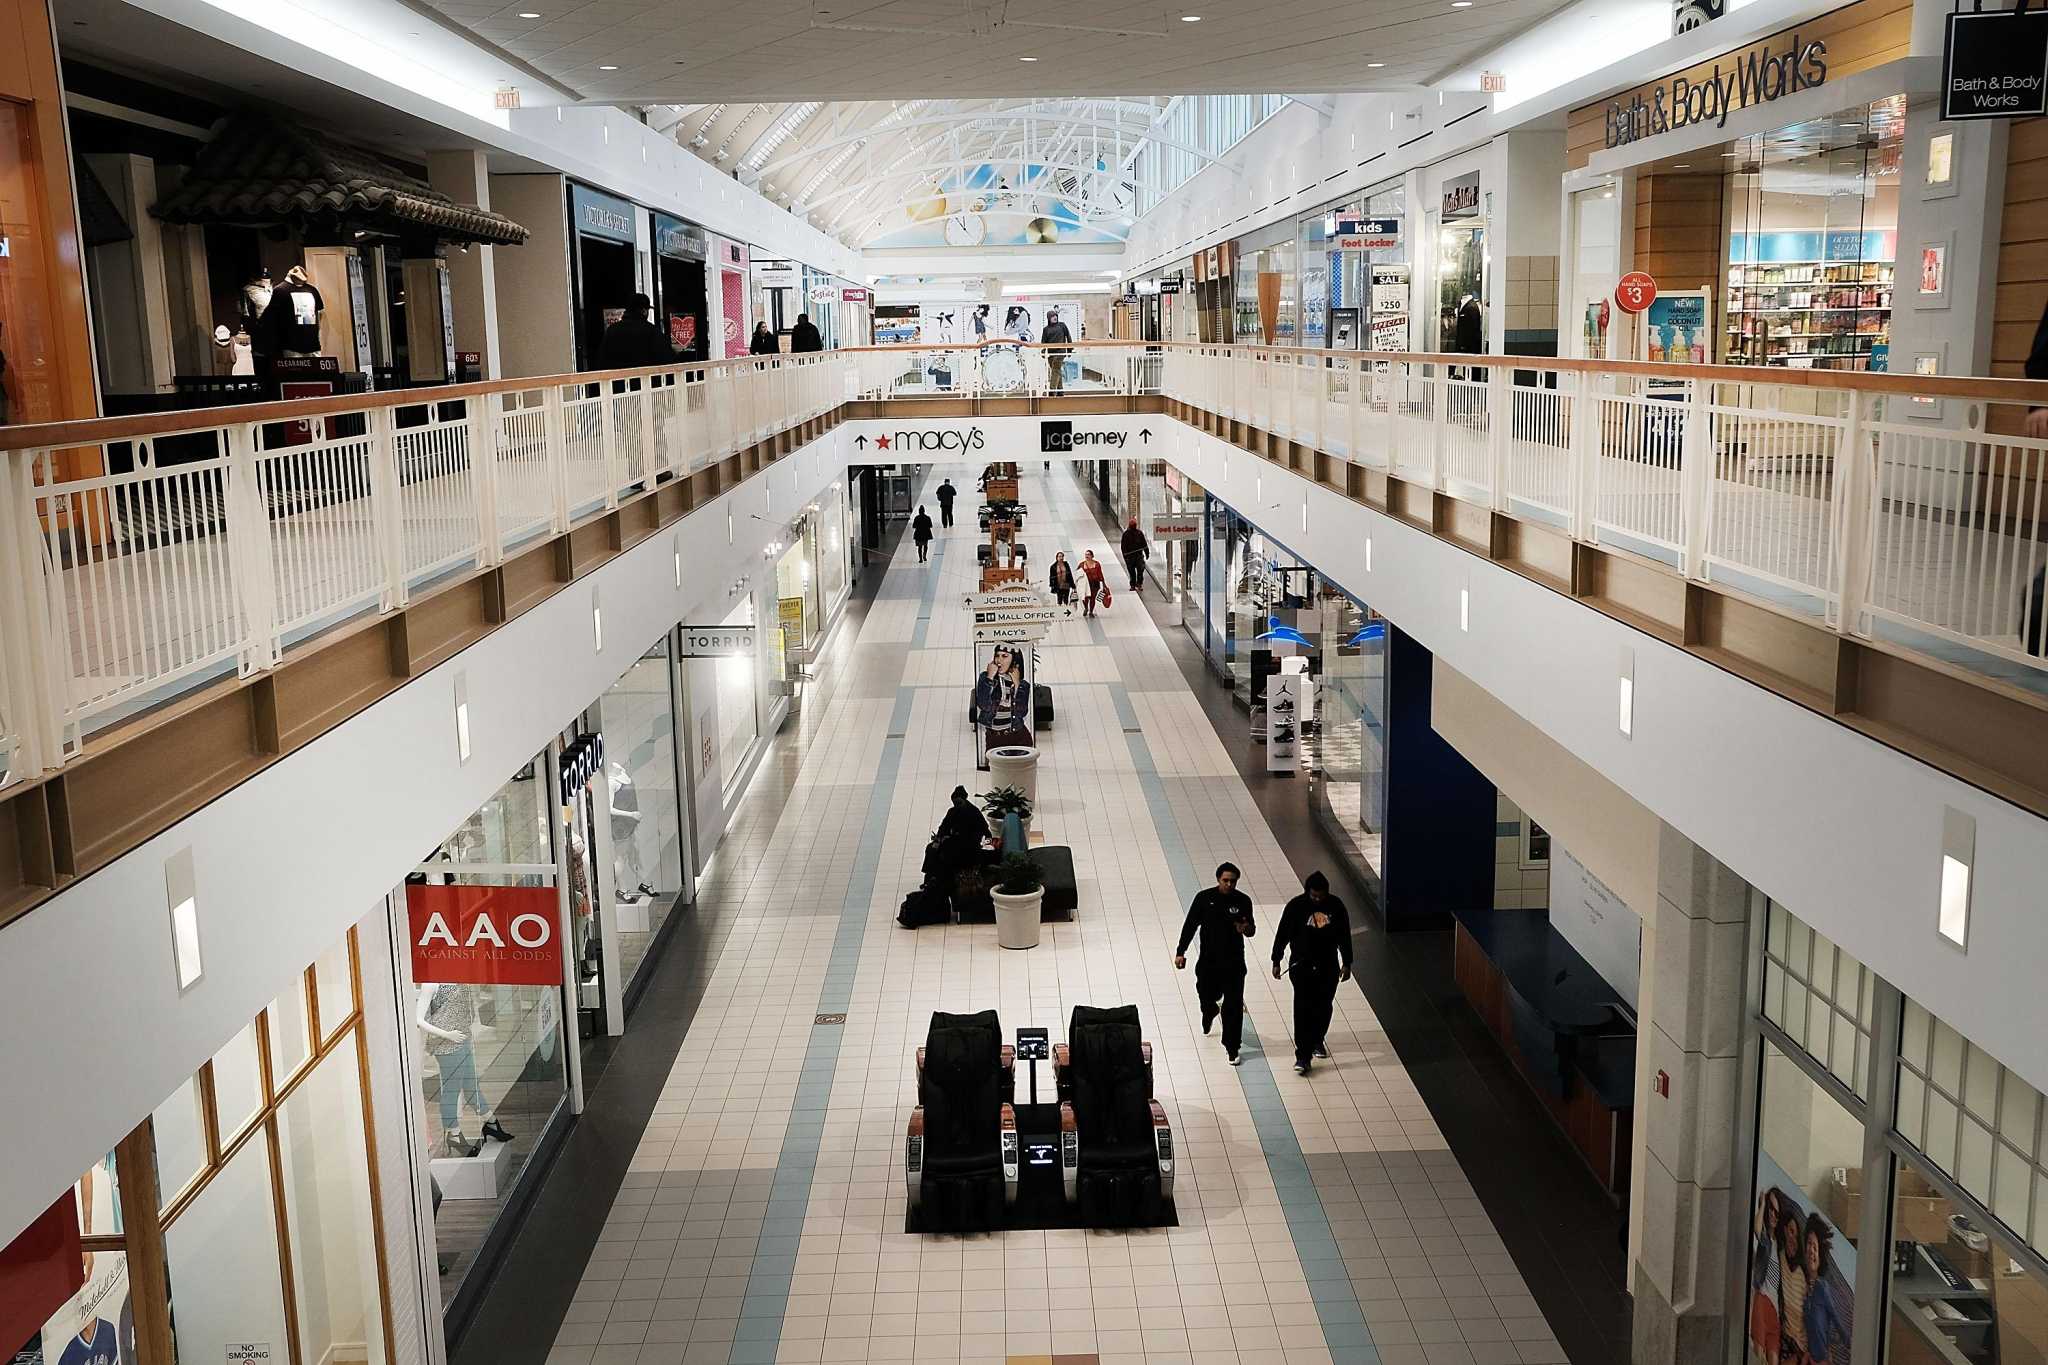 Report: Macy's store at Waterbury mall sold, slated for redevelopment